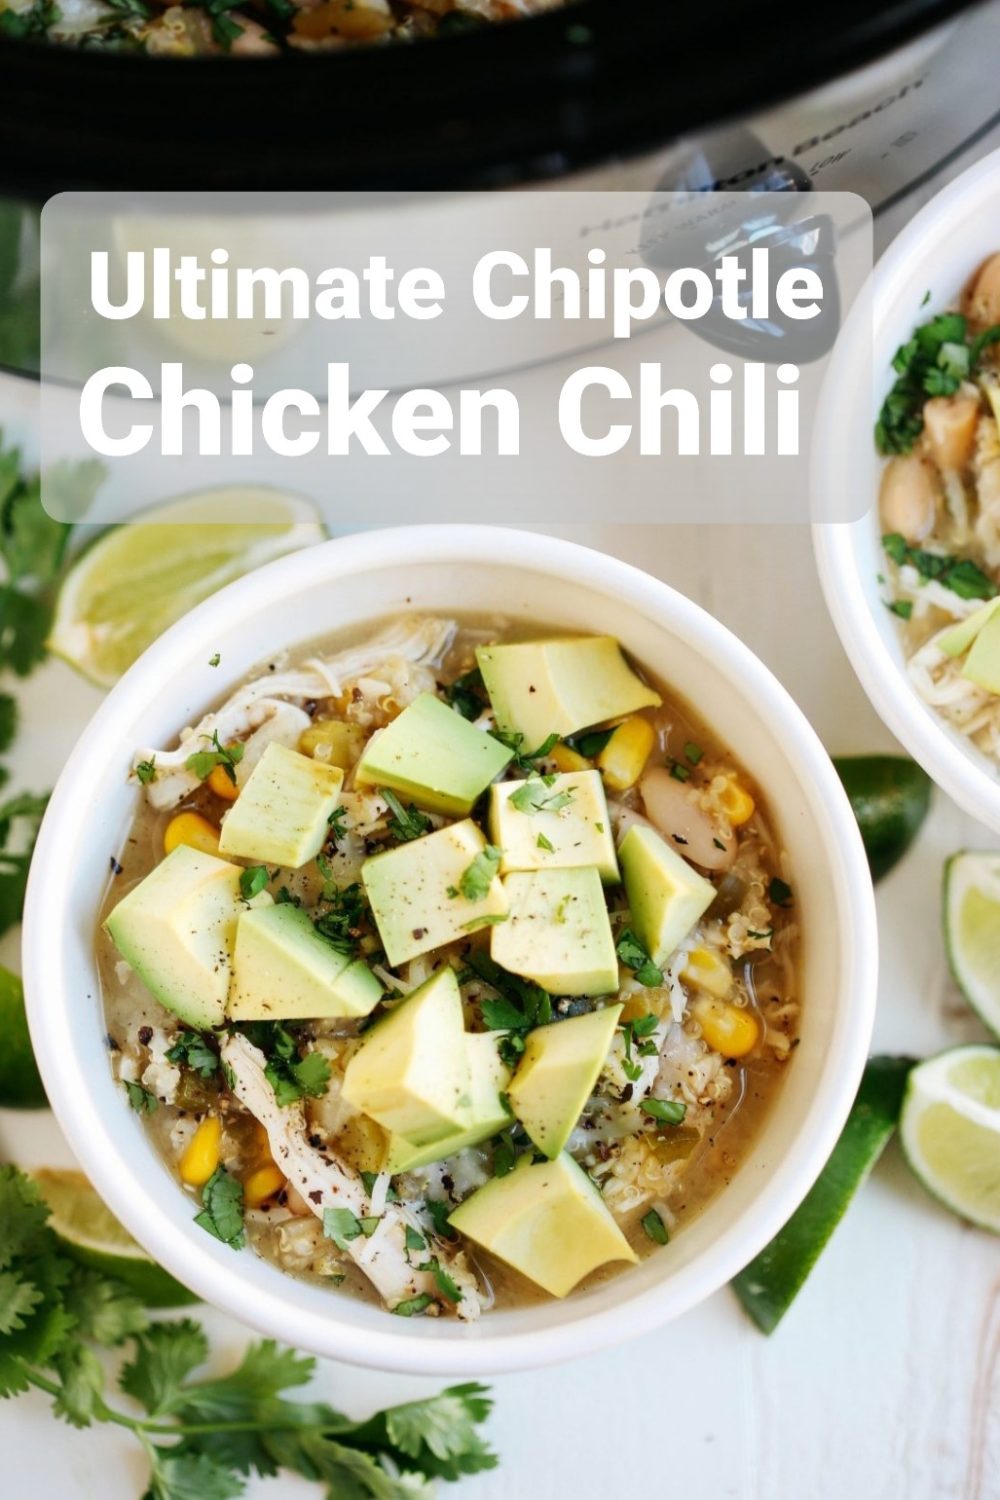 Ultimate Chipotle Chicken Chili To Satisfy Your Cold Weather Cravings ...